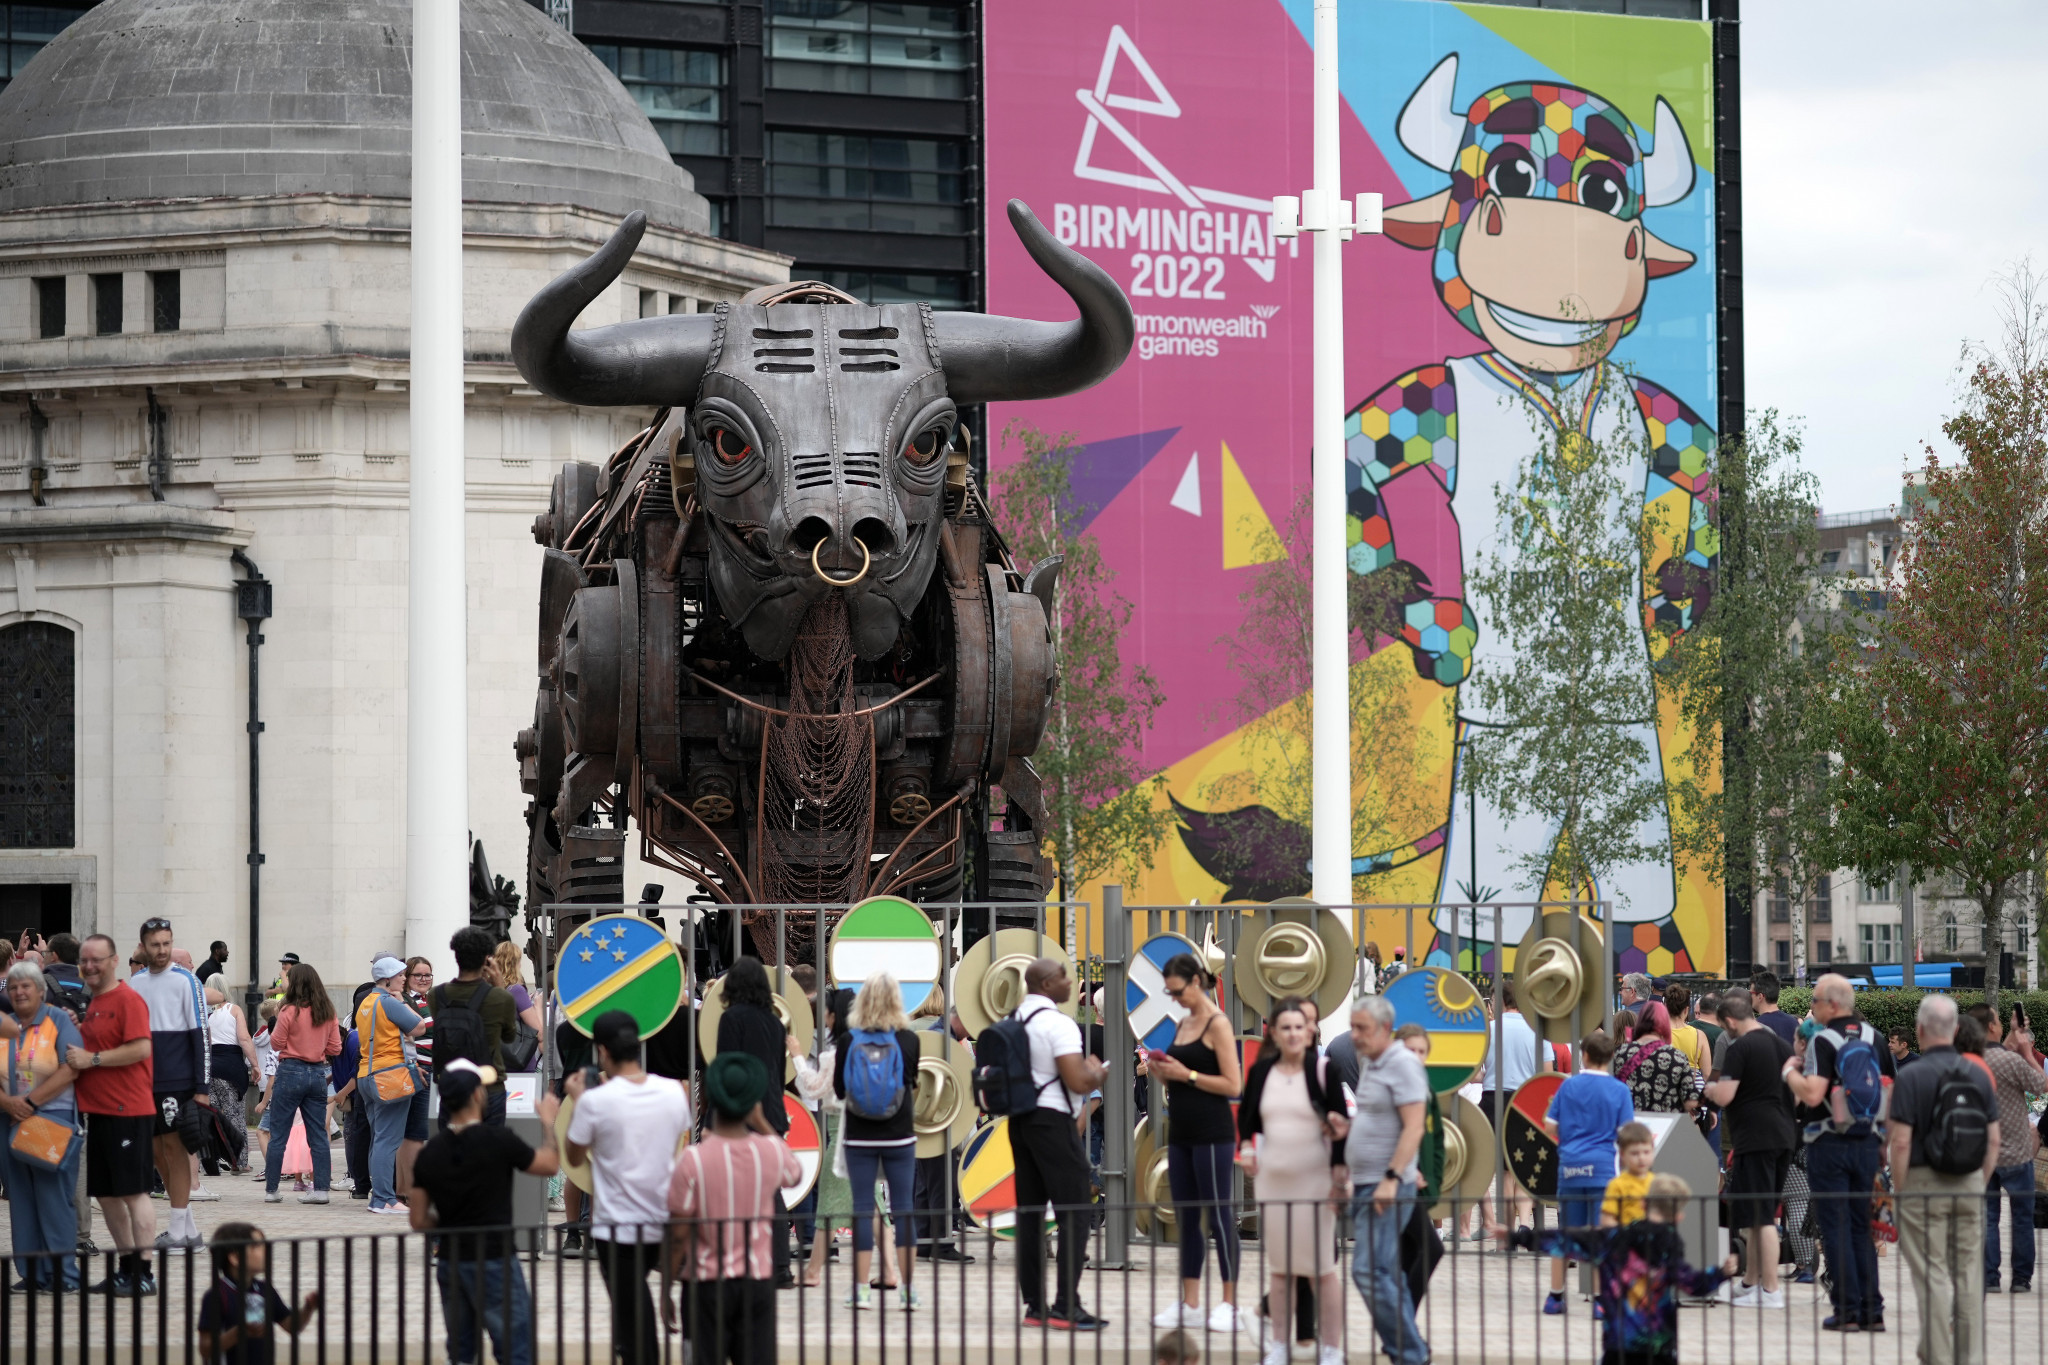 Thousands turned up to see the animatronic bull in Birmingham ©Getty Images